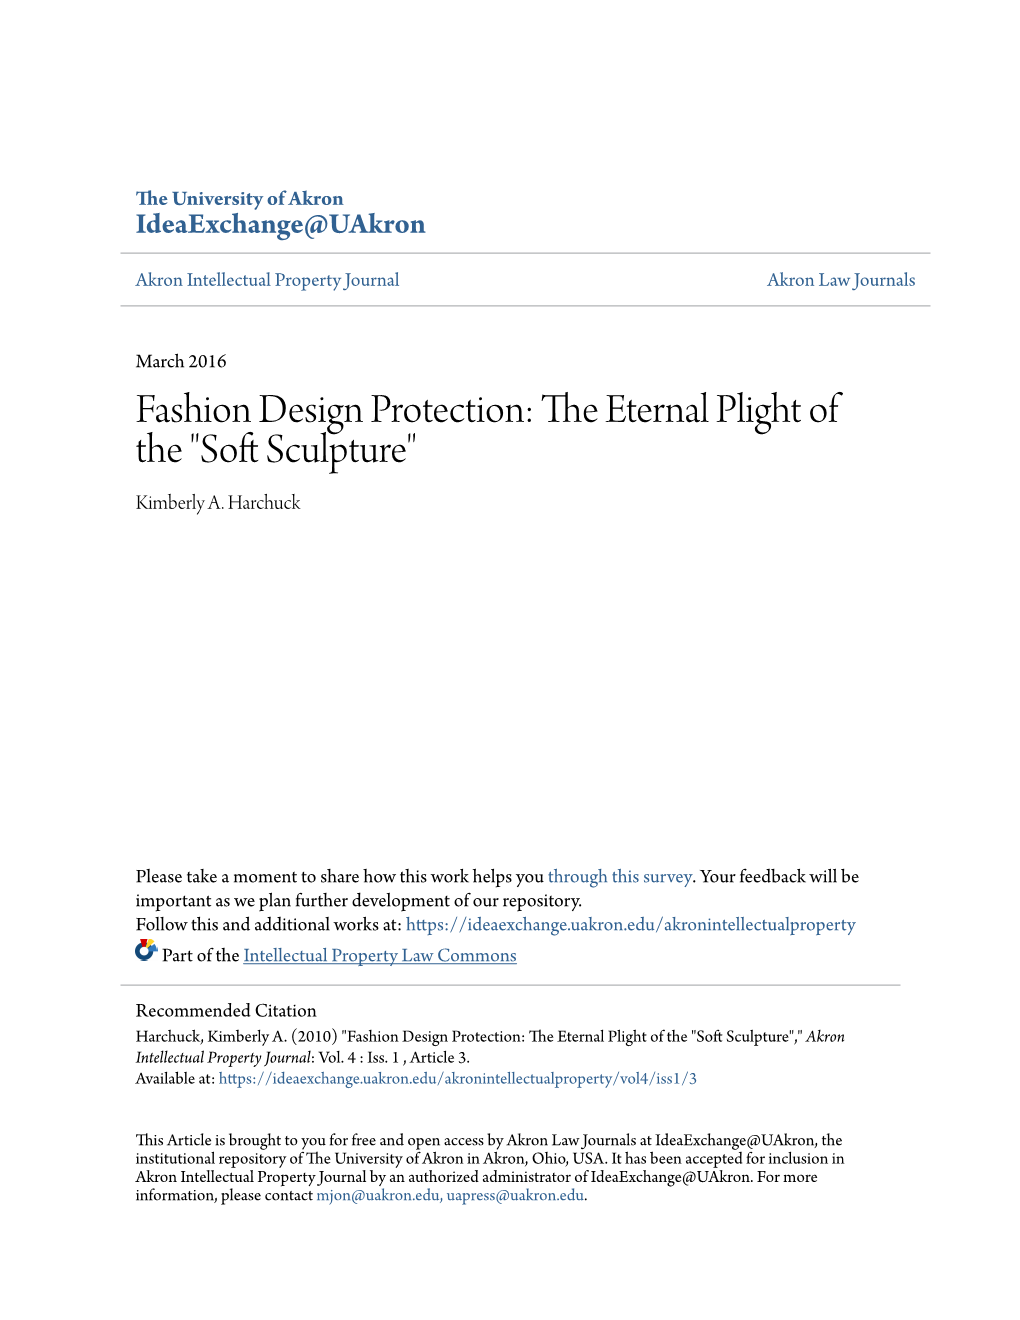 Fashion Design Protection: the Te Ernal Plight of the "Soft Cs Ulpture" Kimberly A